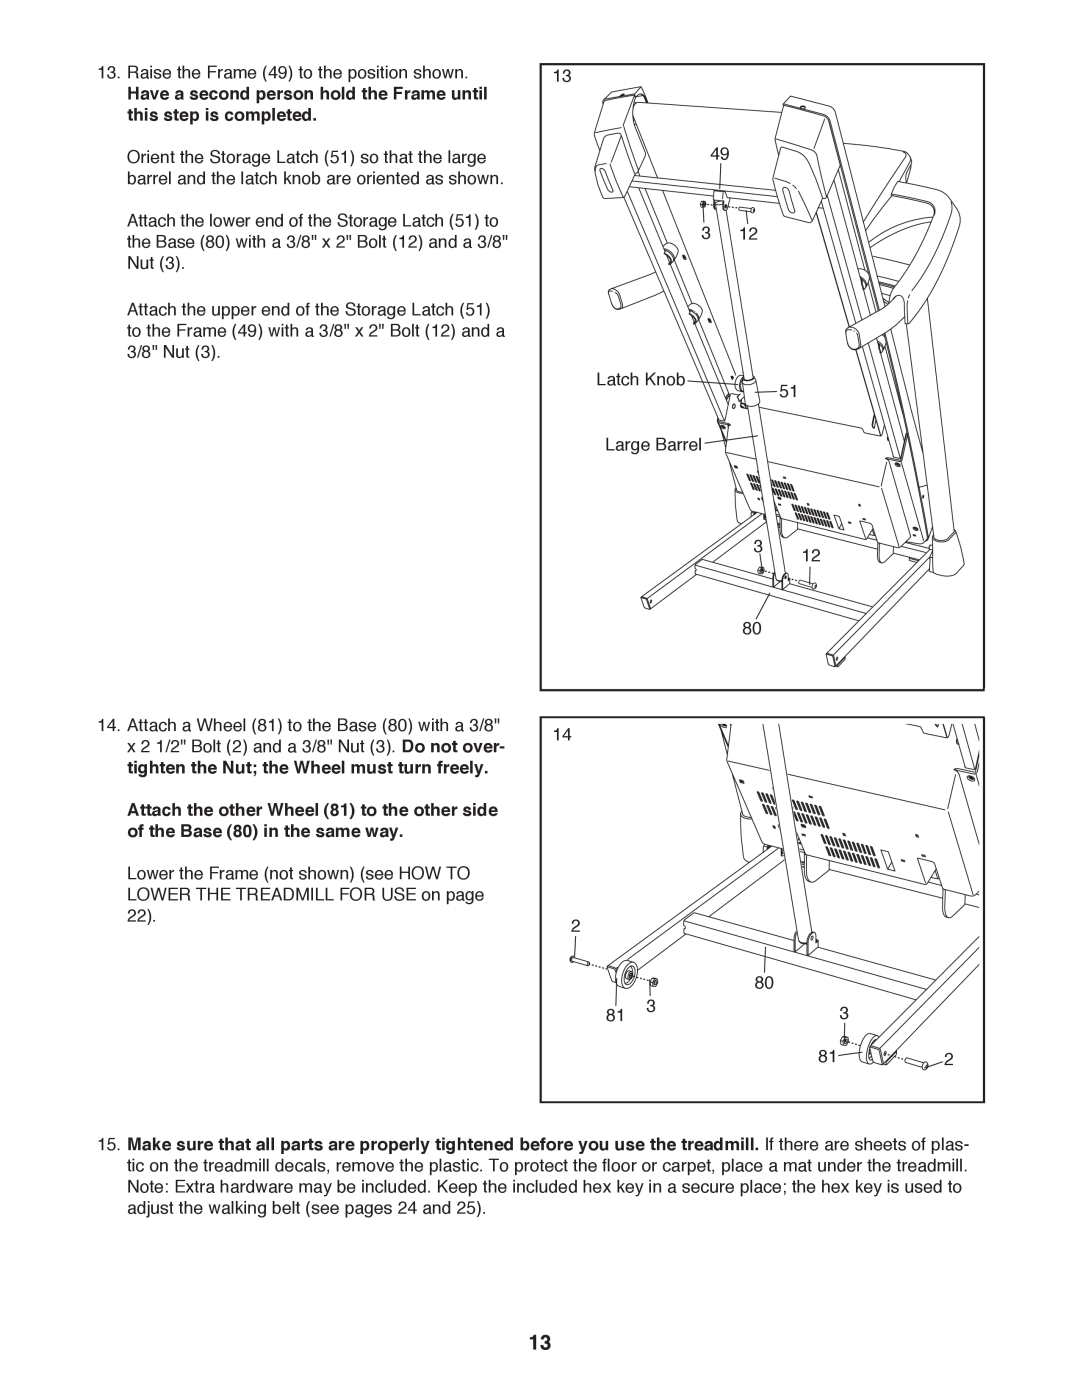 Sears NTL61011.1 user manual Have a second person hold the Frame until this step is completed 